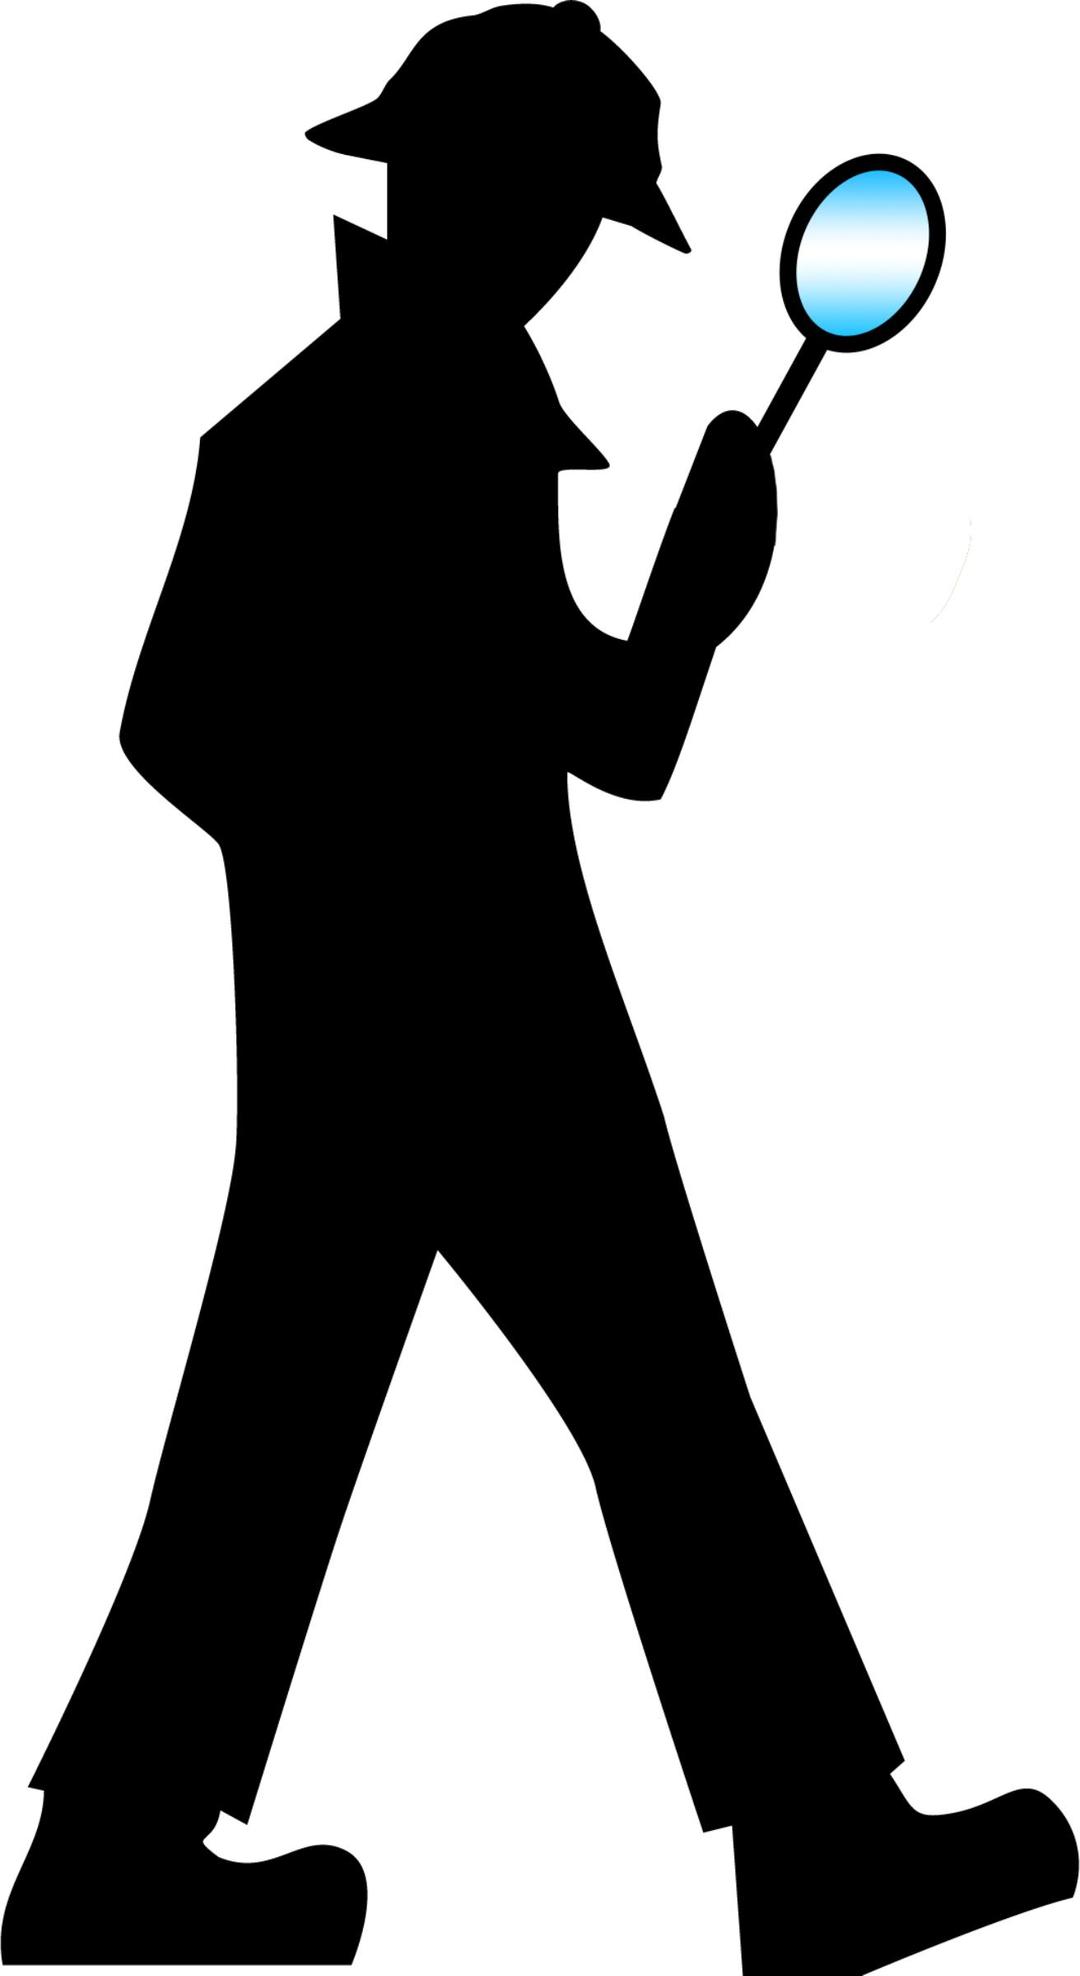 Detective with Magnifying Glass png transparent